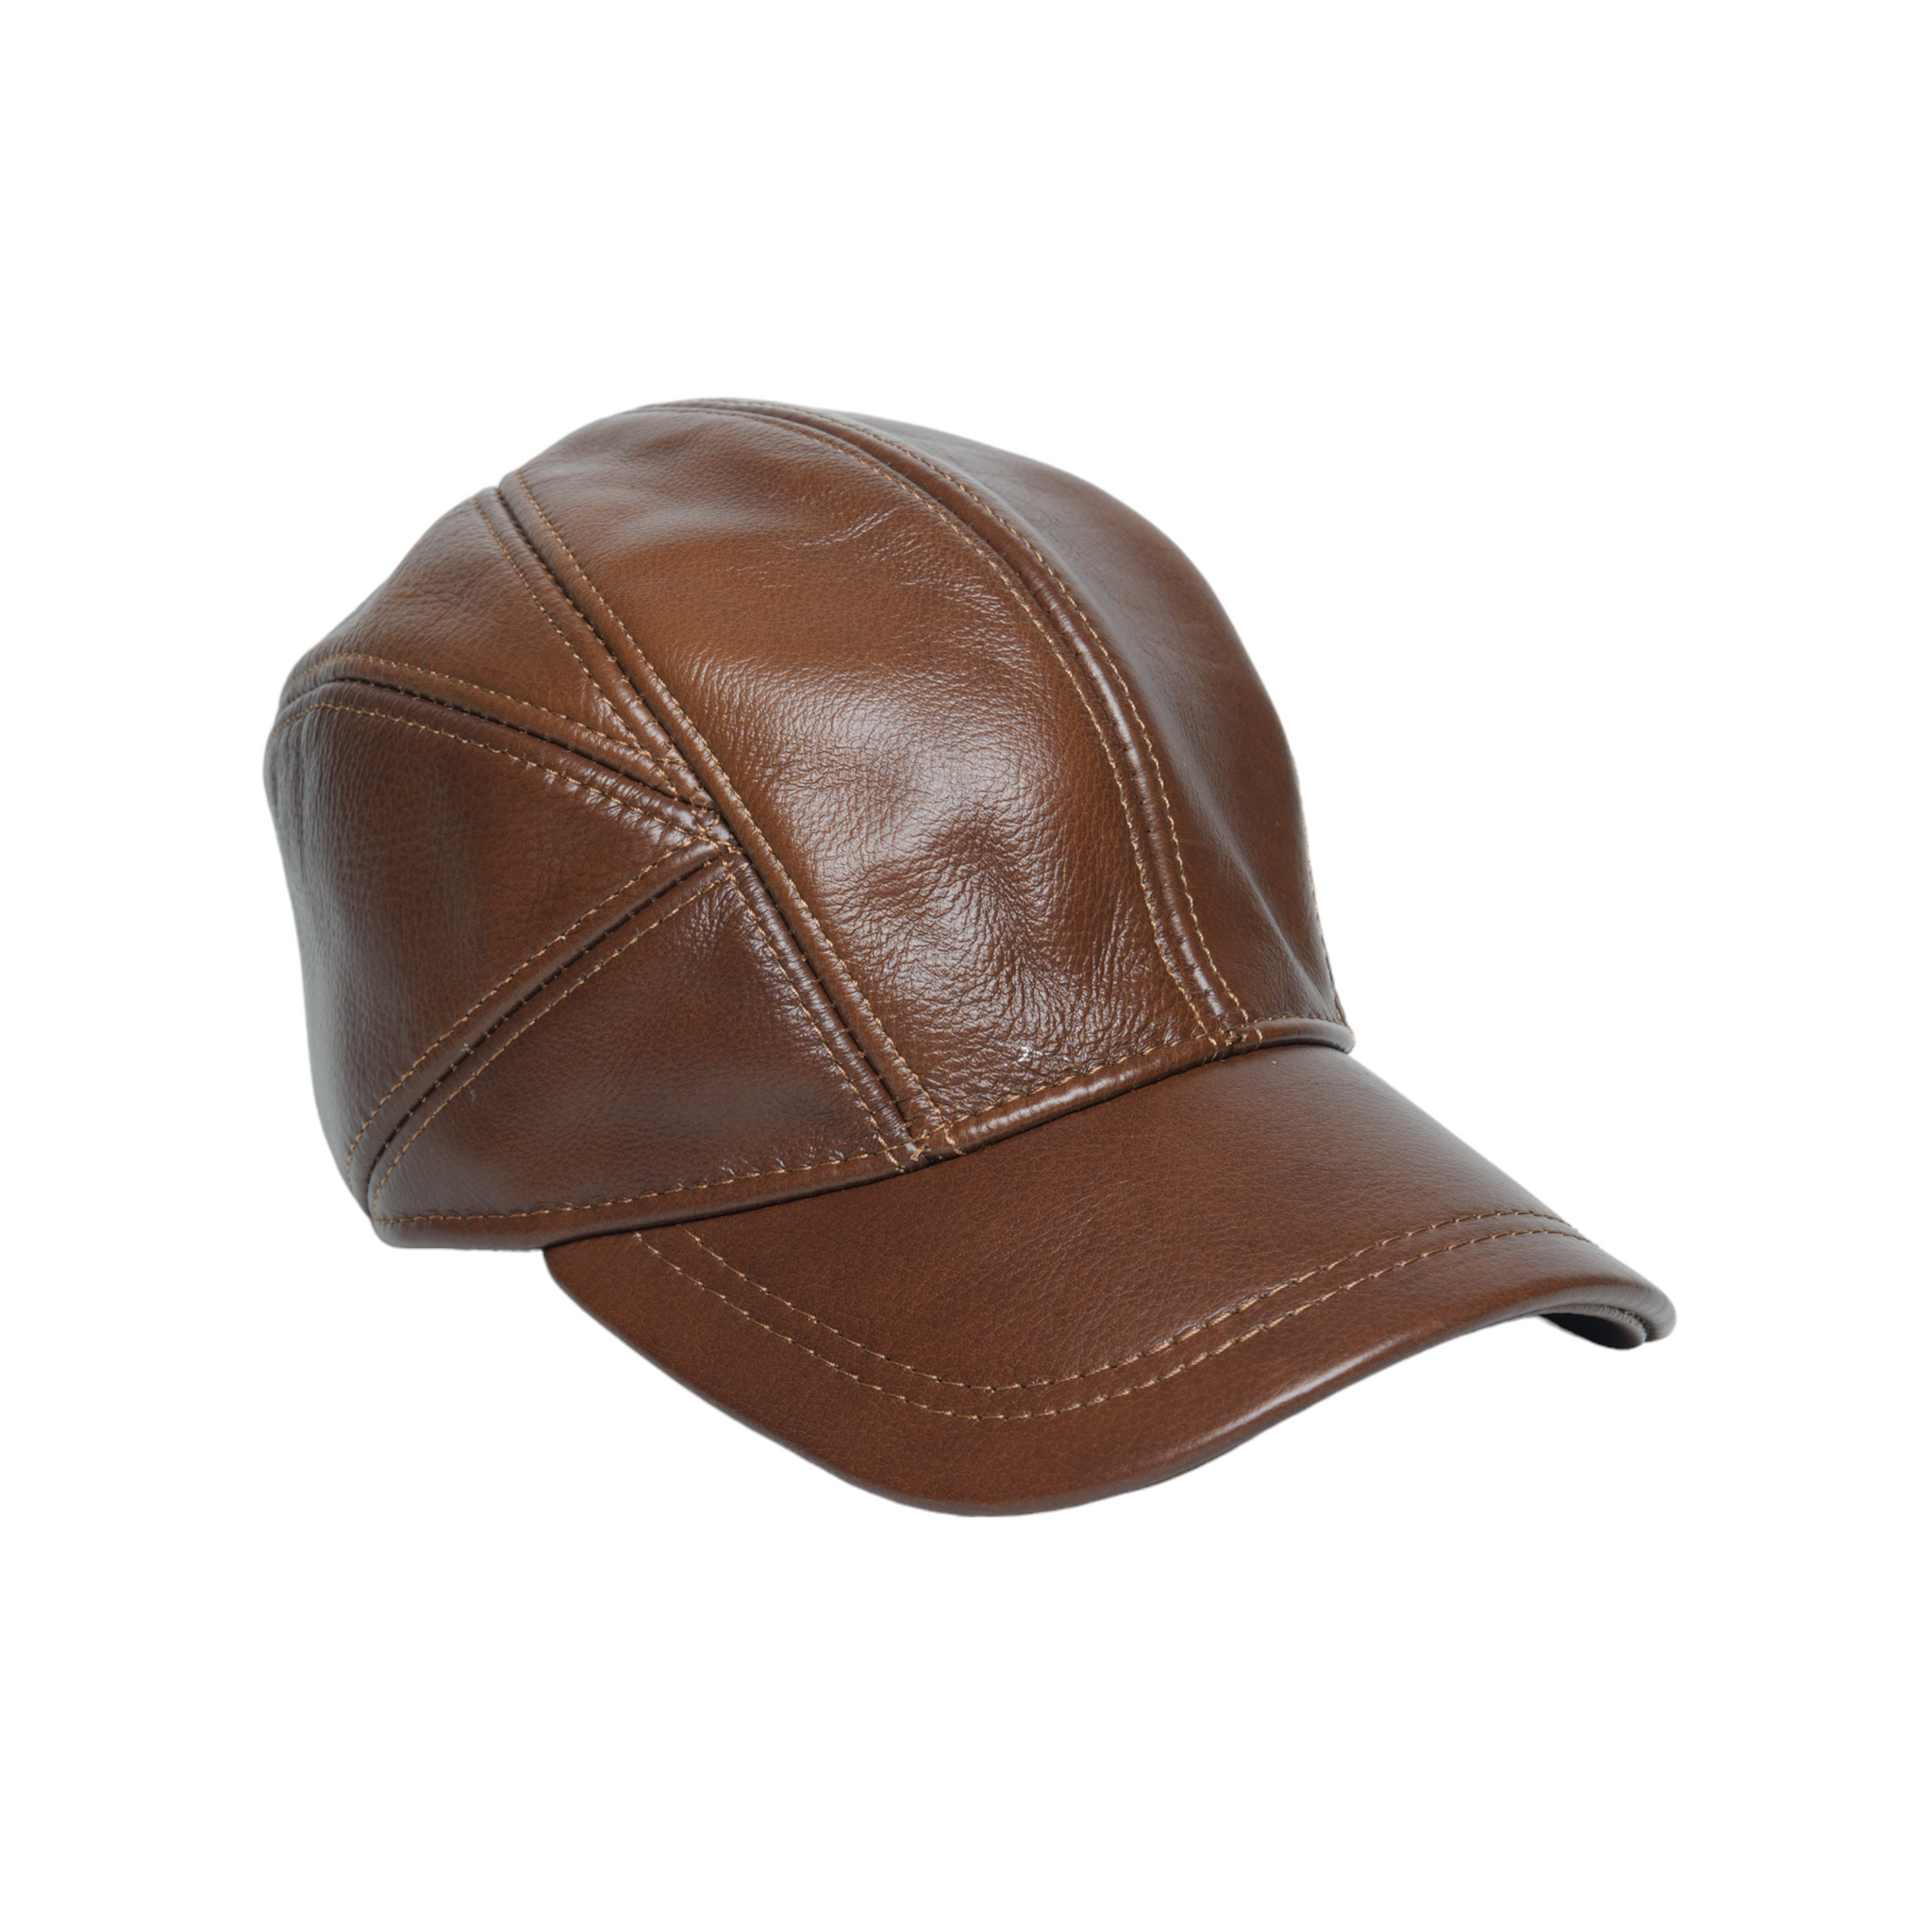 Chokore Vintage Leather Baseball Cap with Ear Protector (Light Brown)